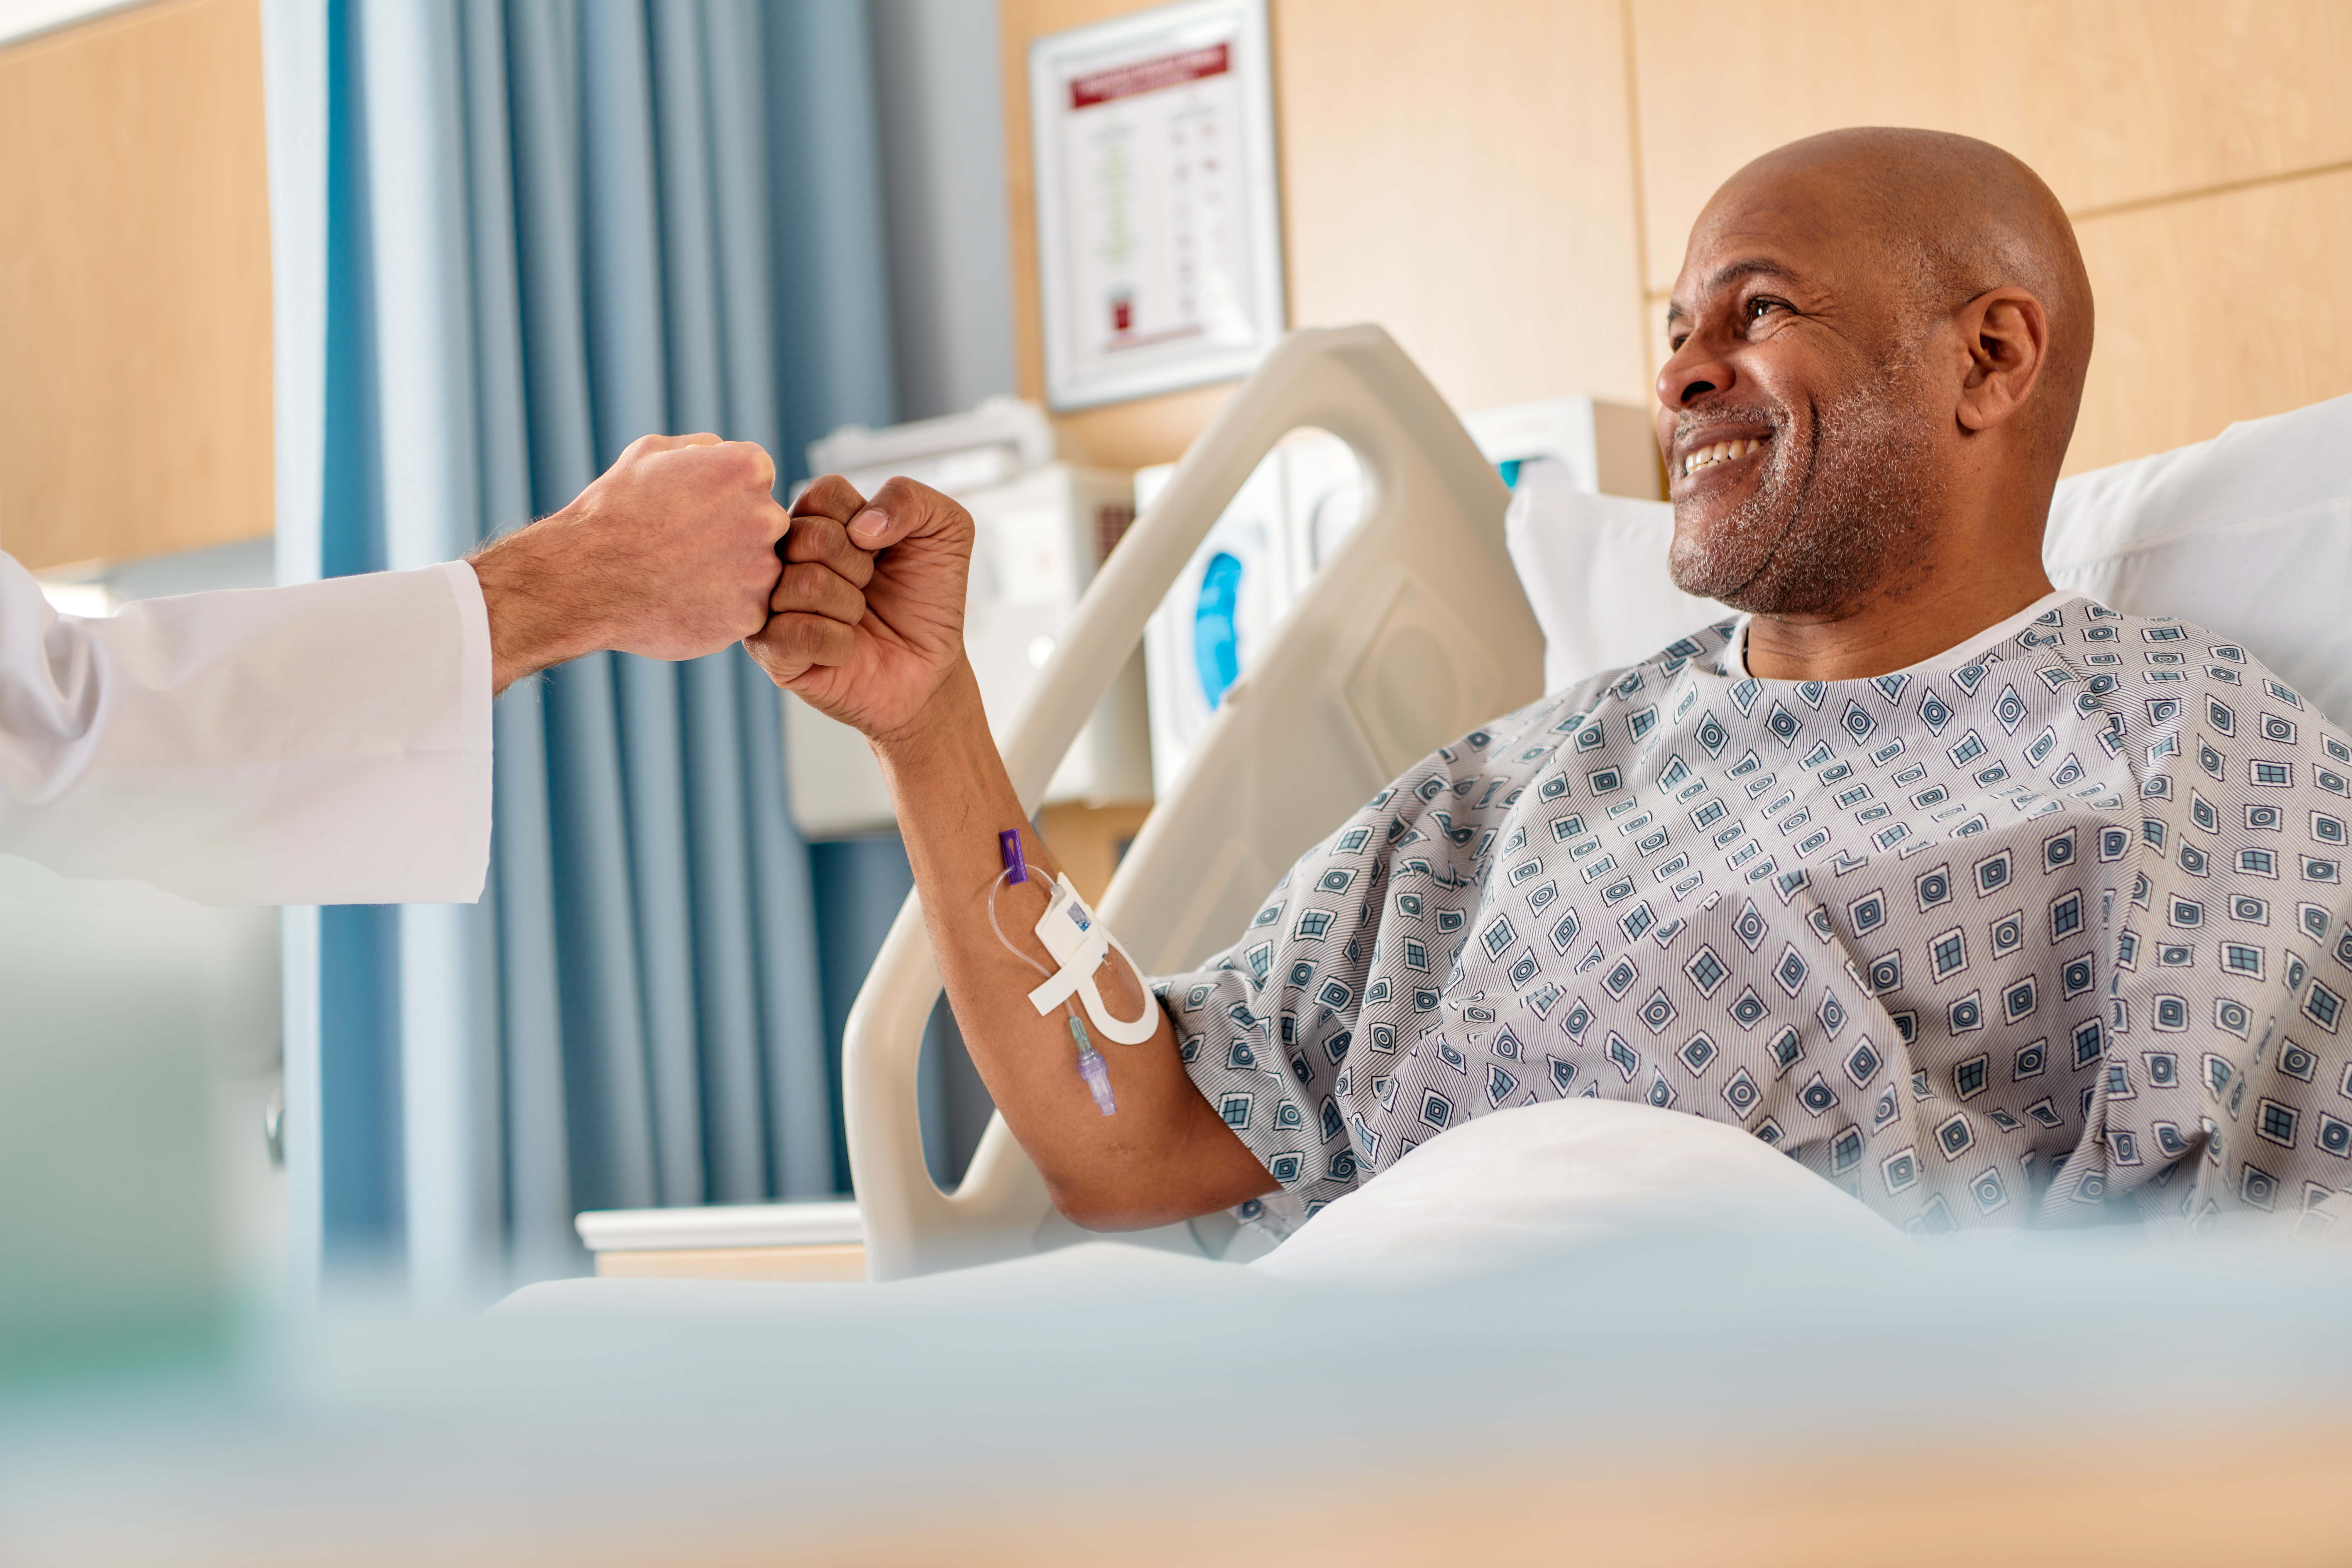 Patient in a hospital bed has the Clik-FIX Catheter Securement Device on his arm as he fistbumps a healthcare provider.